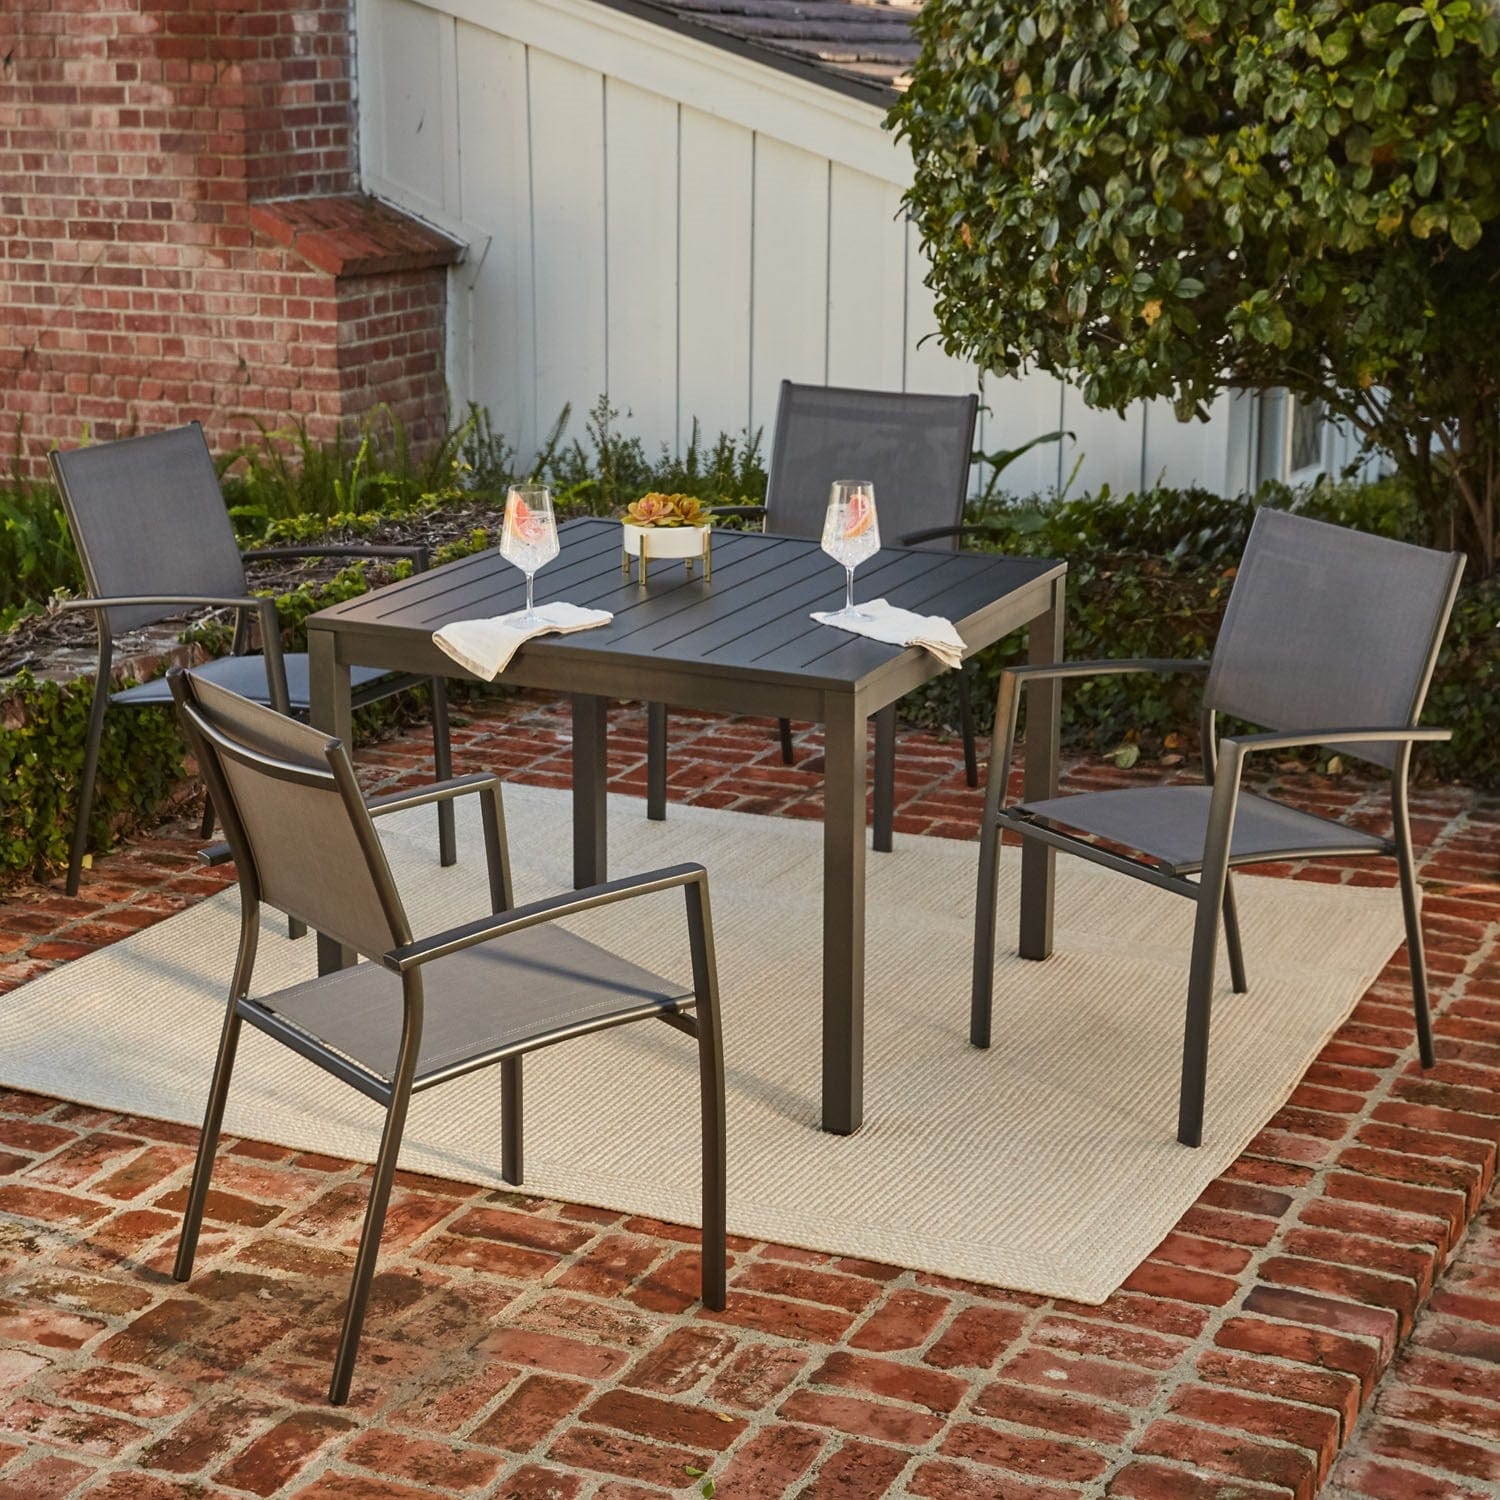 Hanover Outdoor Dining Set Hanover - 5 Piece Dining set | 4 Alum sling dining chairs | Square slat top dining table | NAPLESDN5PCSQ-GRY